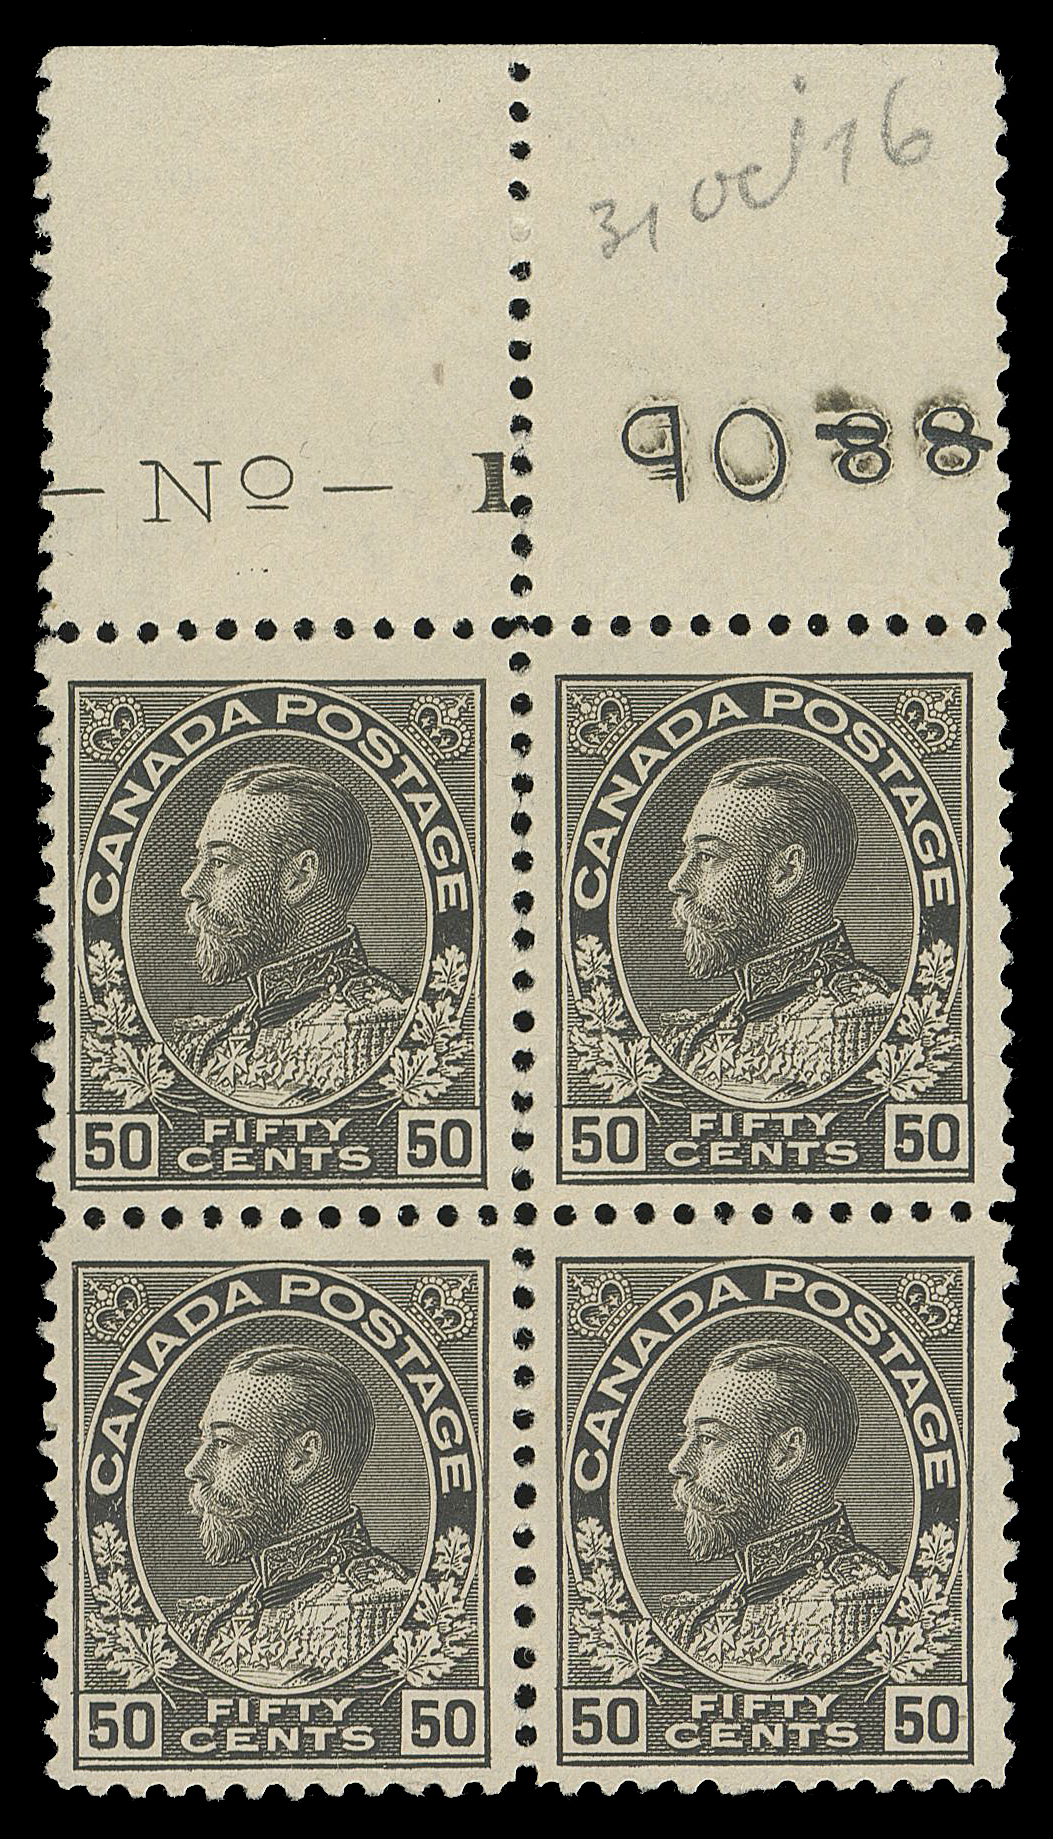 ADMIRAL STAMPS  120a,A mint block showing large part plate imprint with "No. - 1" and printing order "88" punched out (replaced with either "101" or "193"), trace of hinging in ungummed portion of the selvedge, light diagonal gum bend of natural cause, all stamps NH, the top right being unusually choice. A very scarce plate block, F-VF NH (Unitrade cat. $6,960)